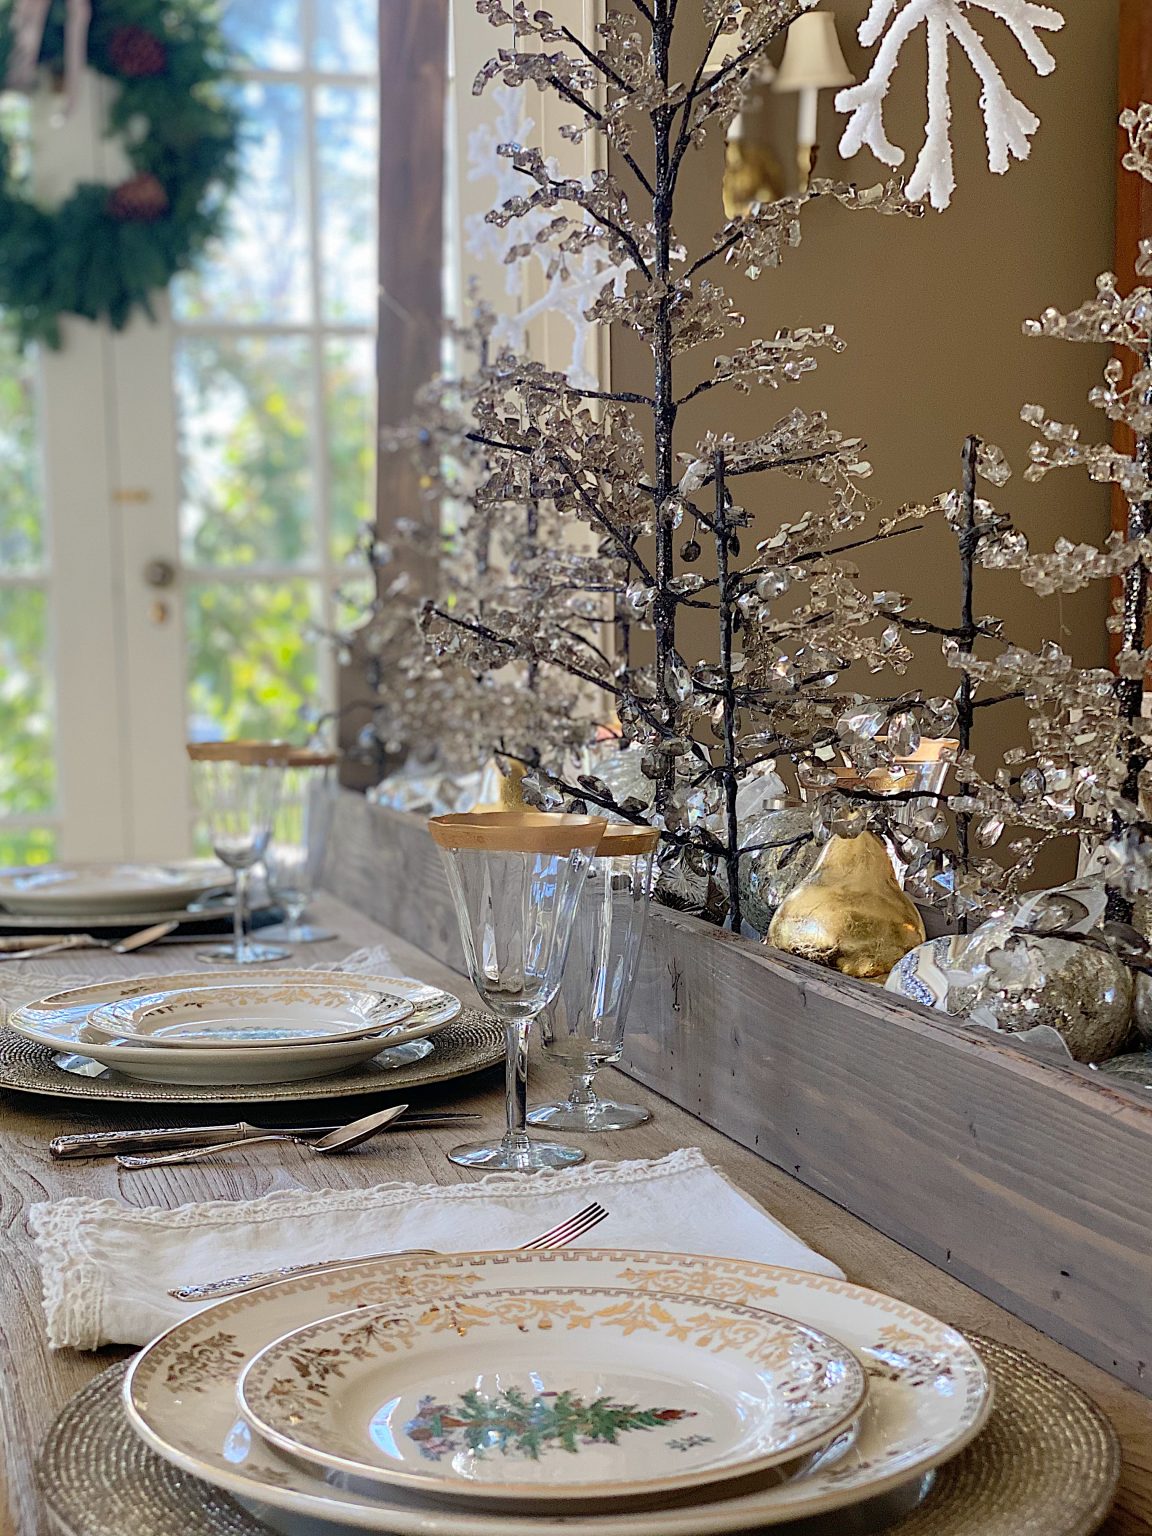 Dining Room Christmas Decor - MY 100 YEAR OLD HOME